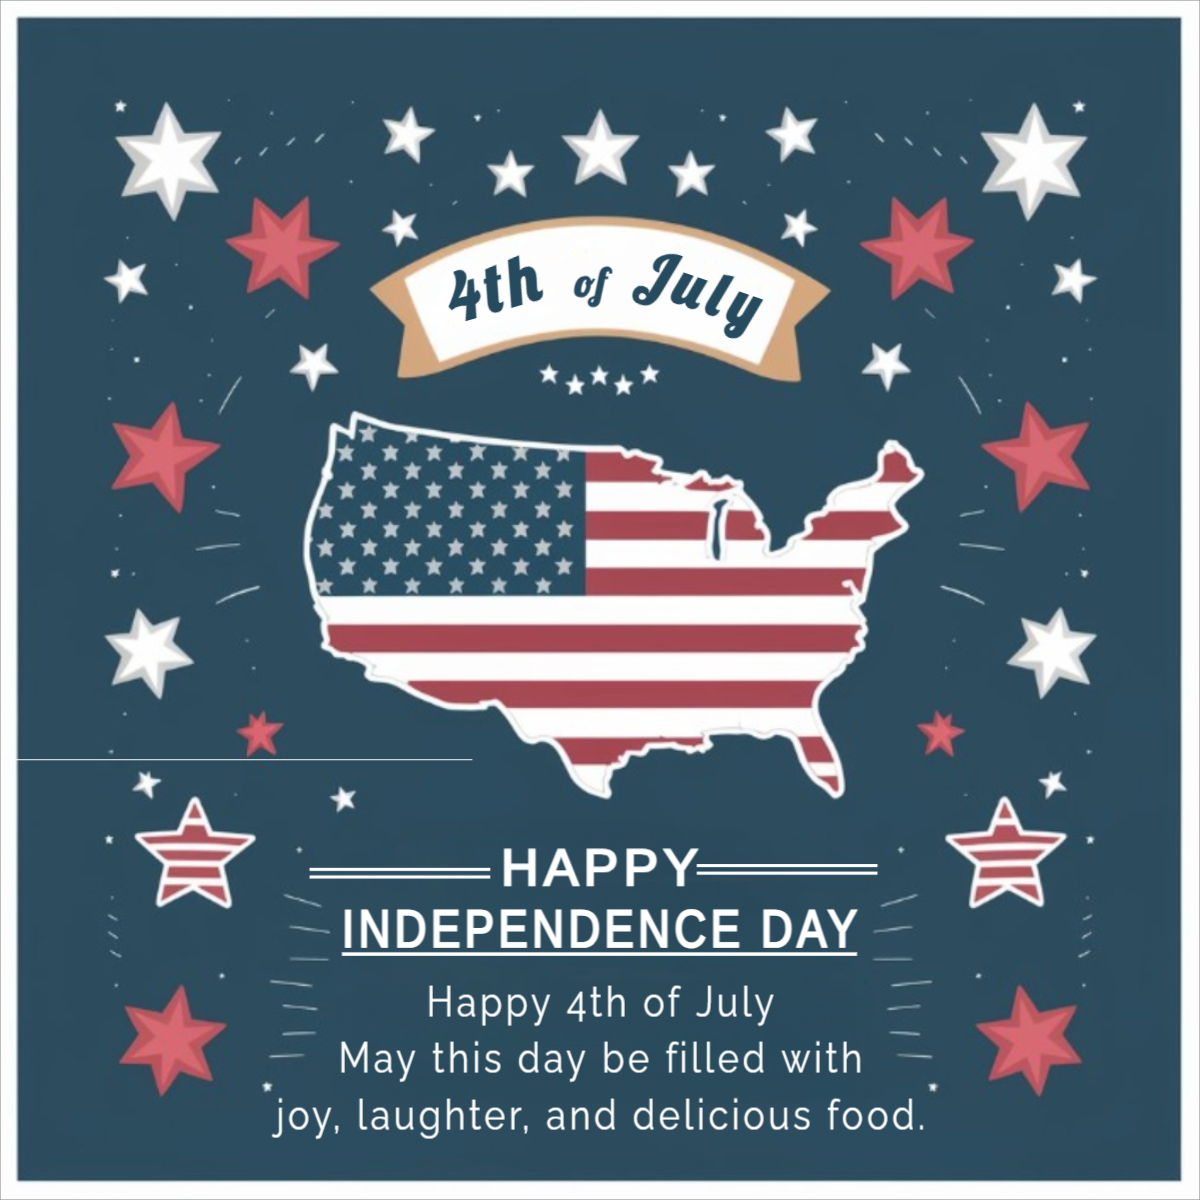 America Independence Day 4th July Happy-Independen-Day Illustration Free Template Download